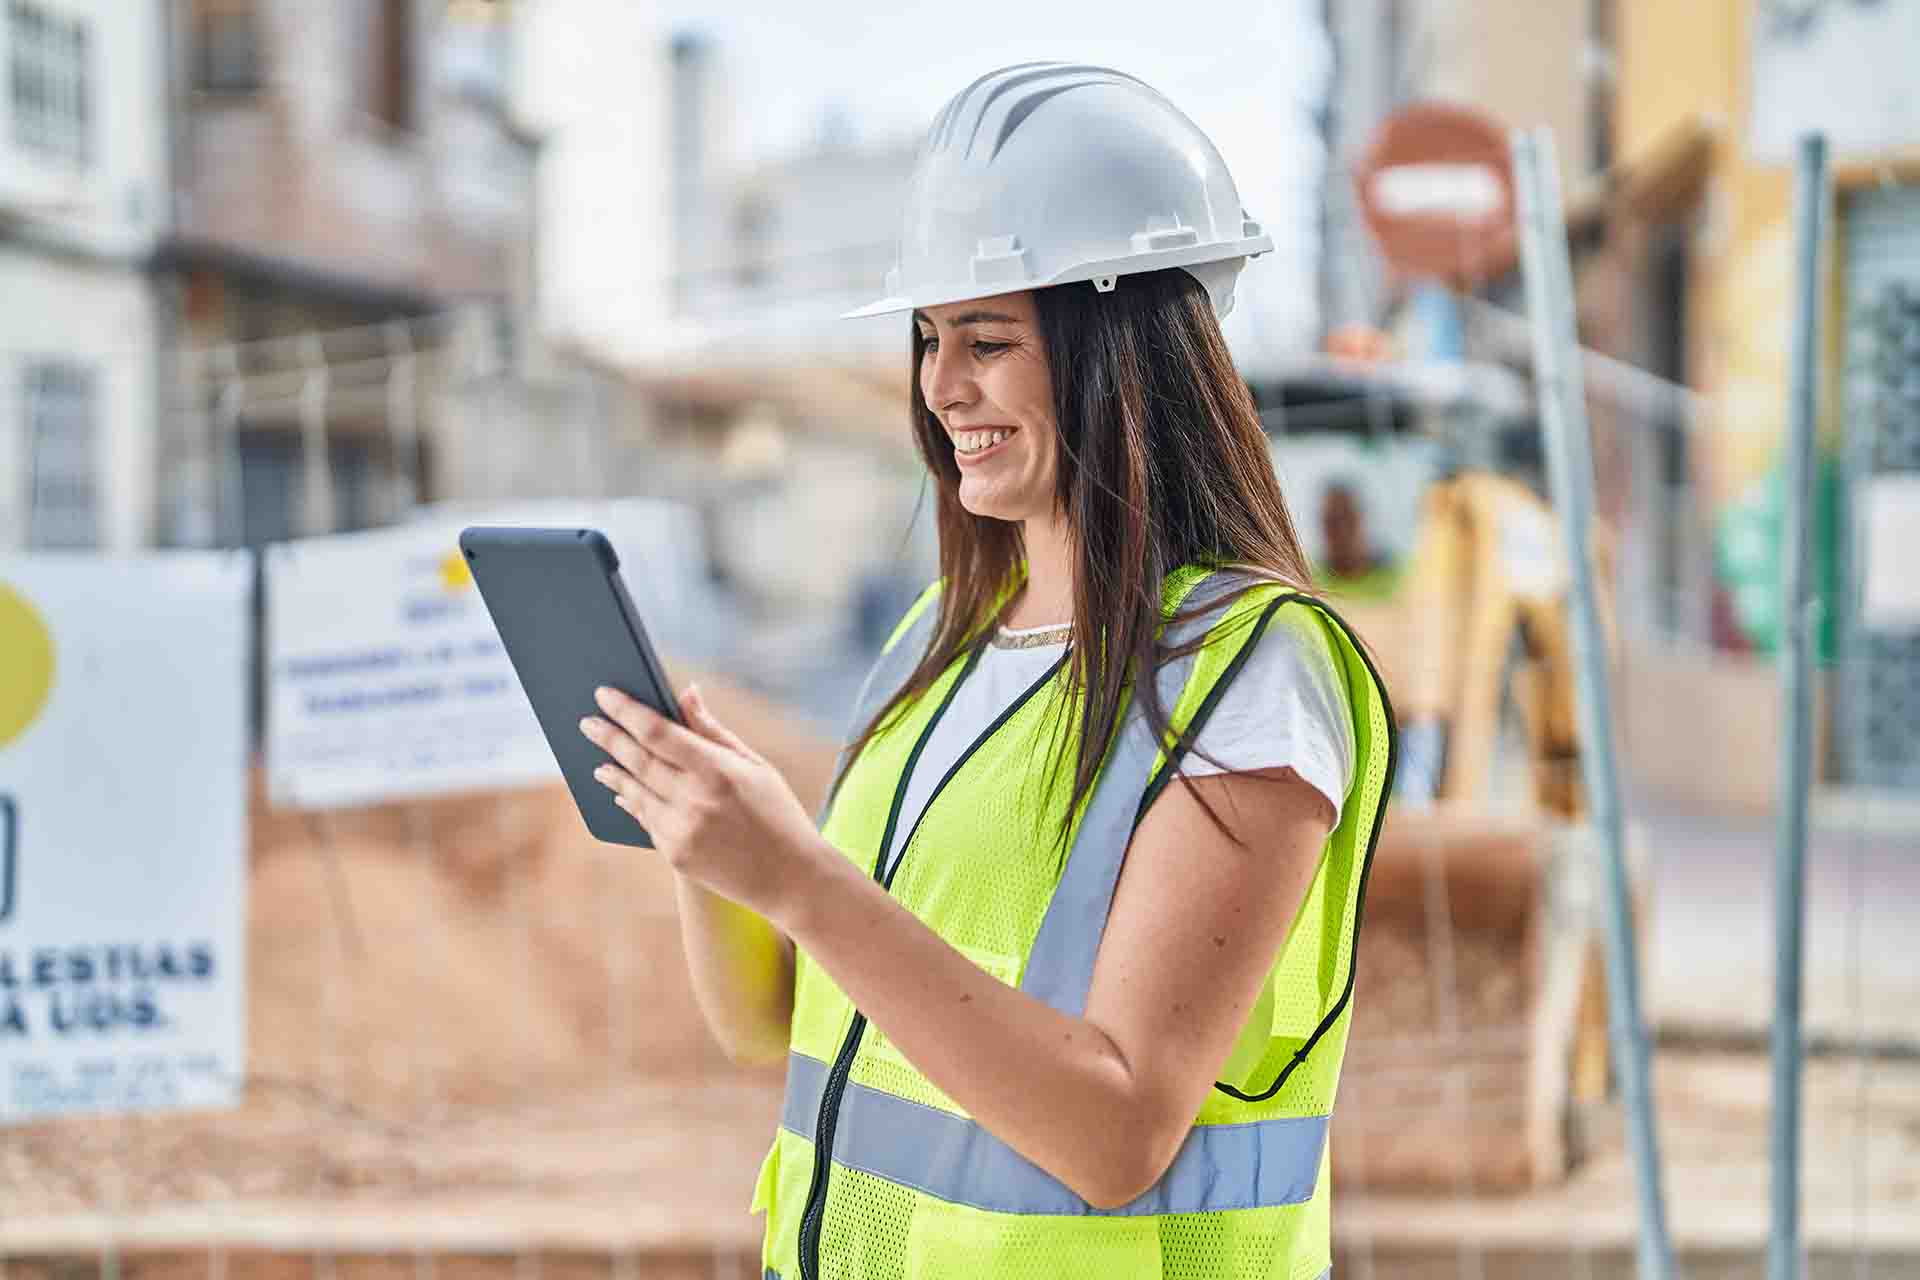 A woman wearing a hardhat and high visibility vest looking at a tablet while standing near street construction.